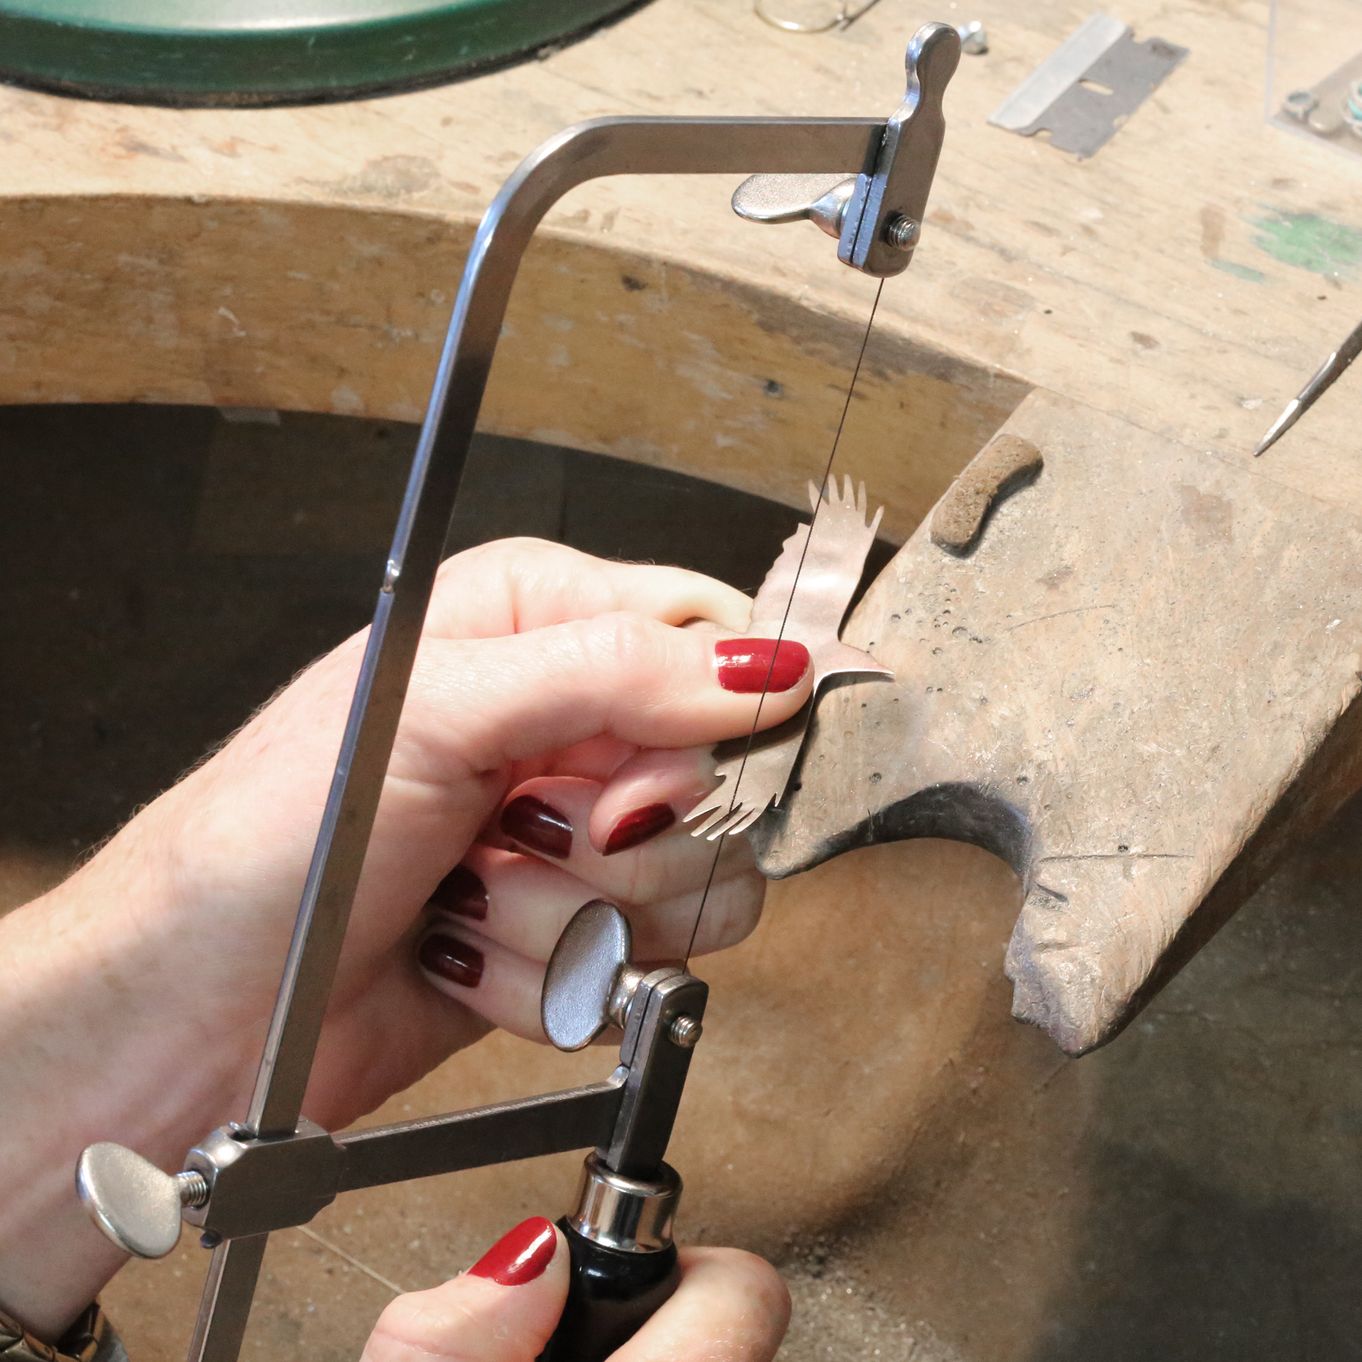 How to Use a Jewellery Saw